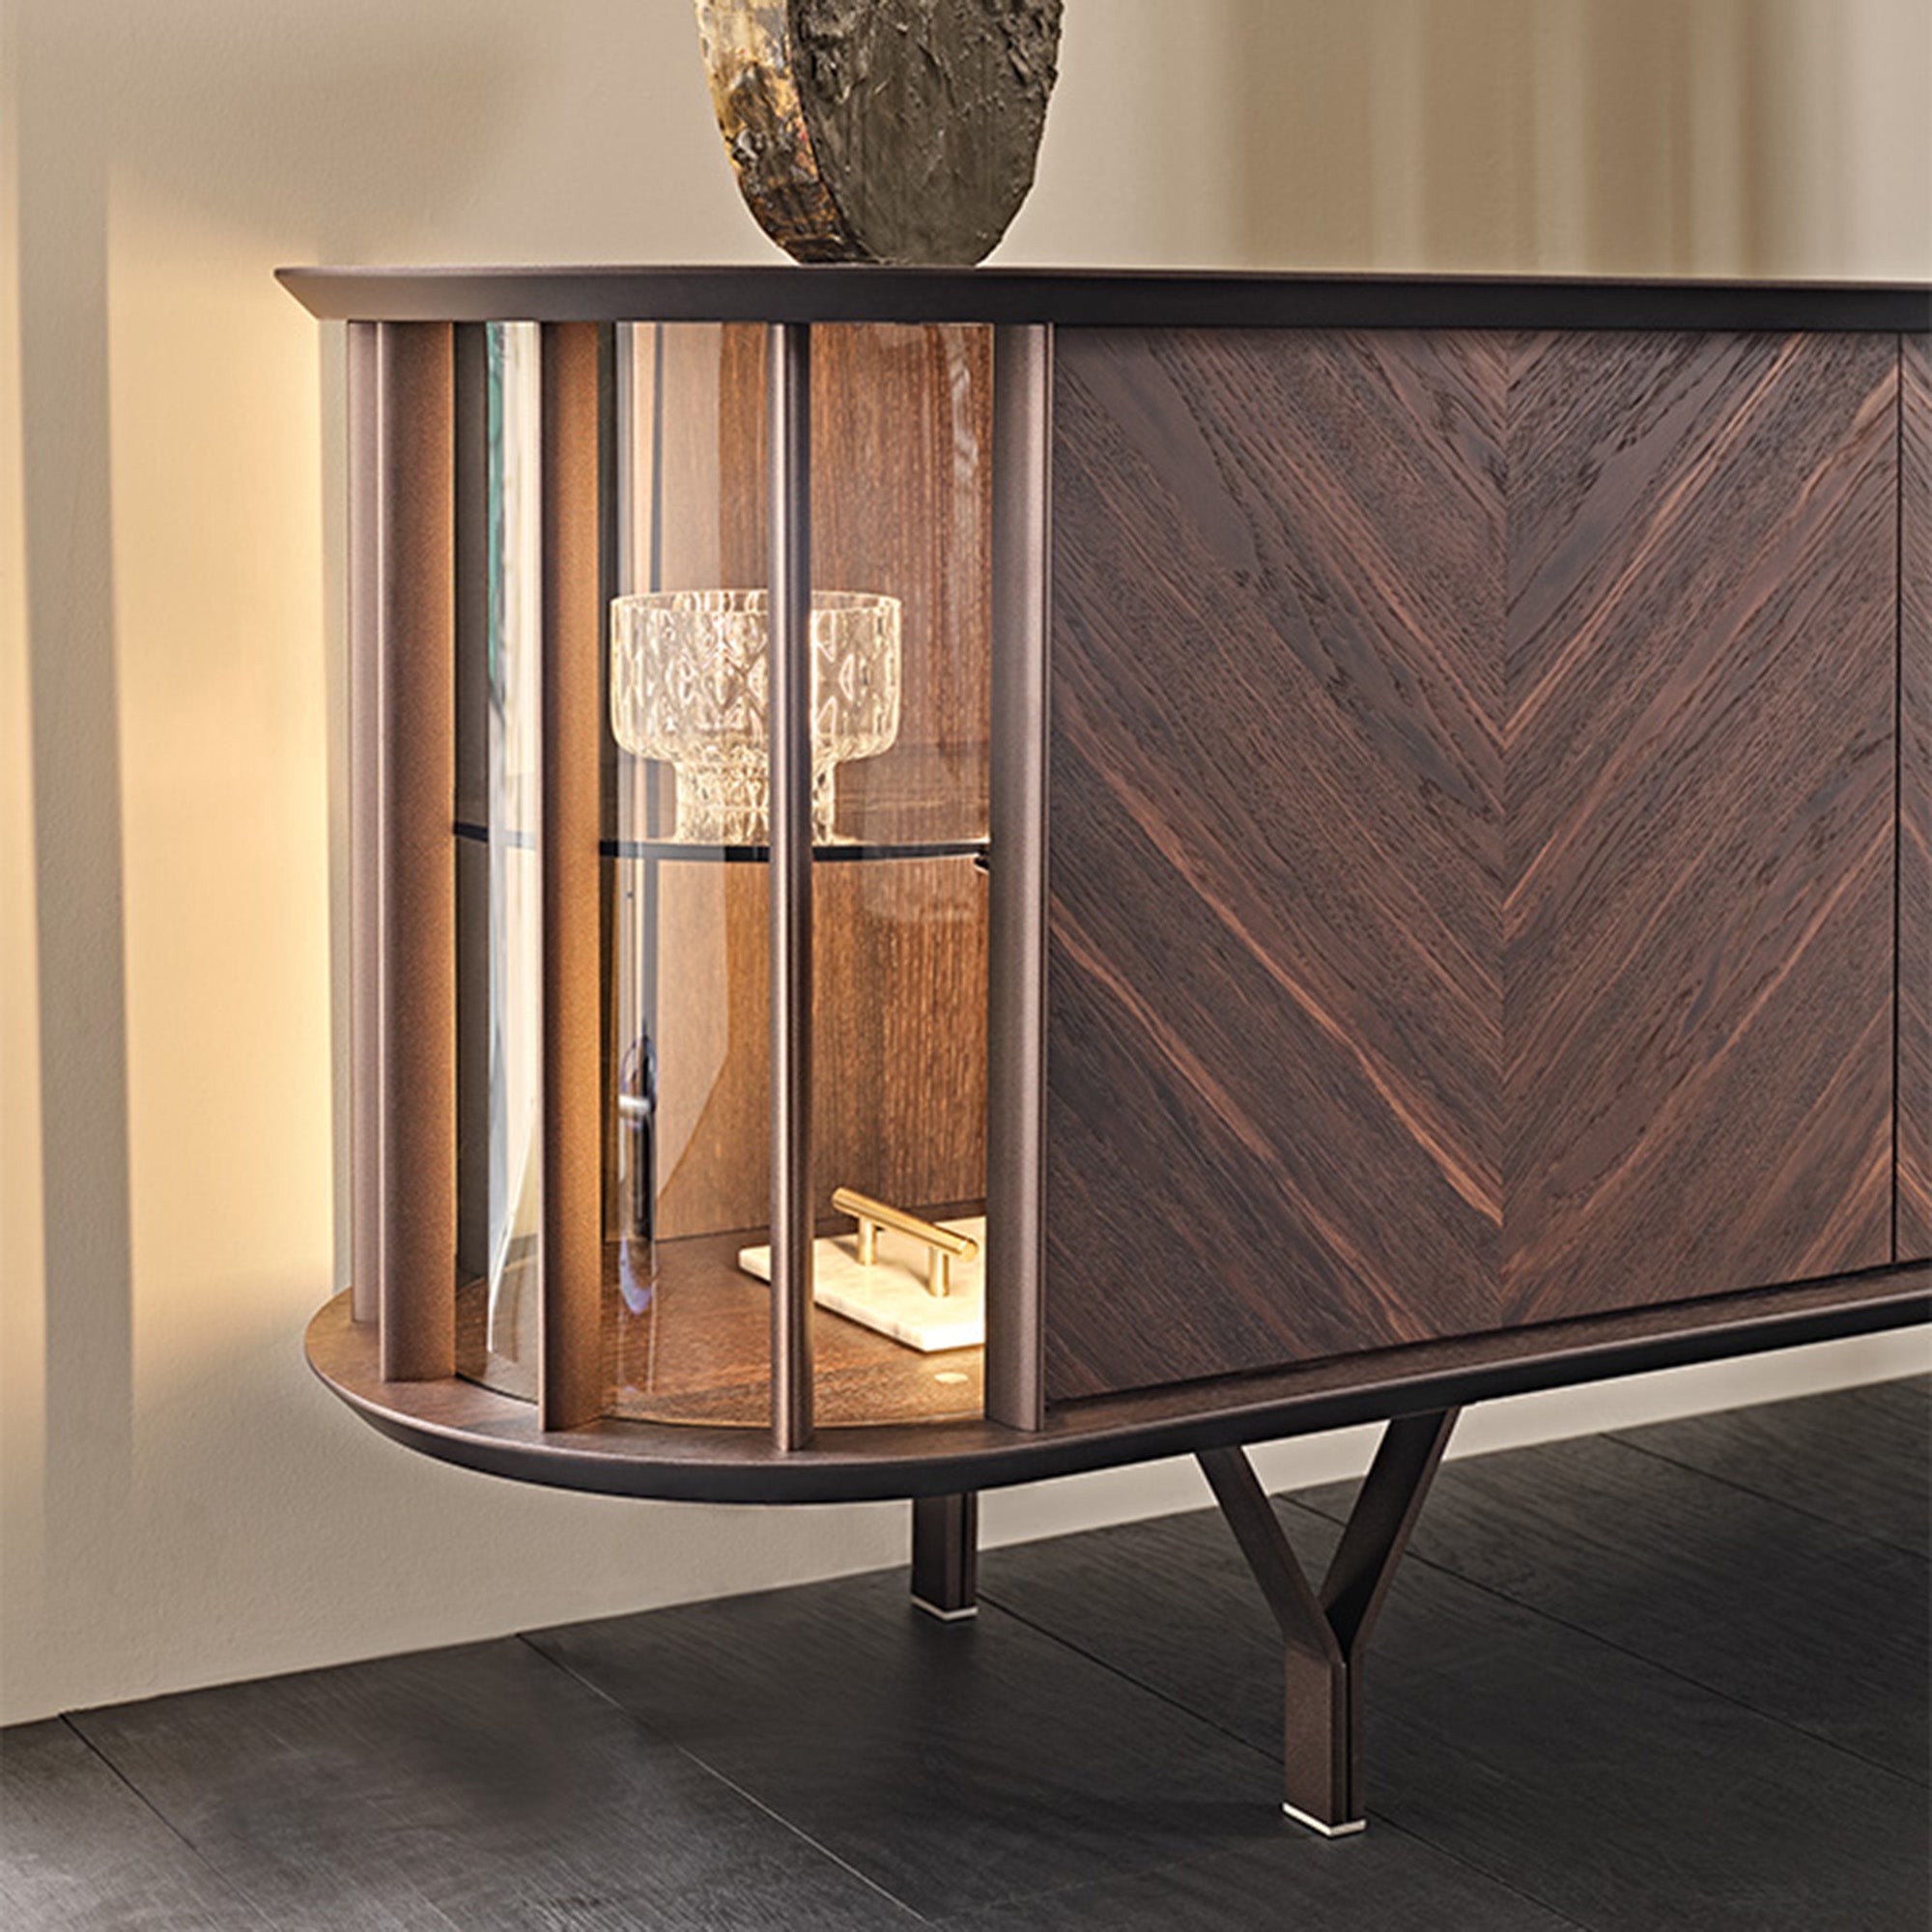 3-78 Sideboard With Metal Inserts and Frame In GFM18 With Wooden Frame